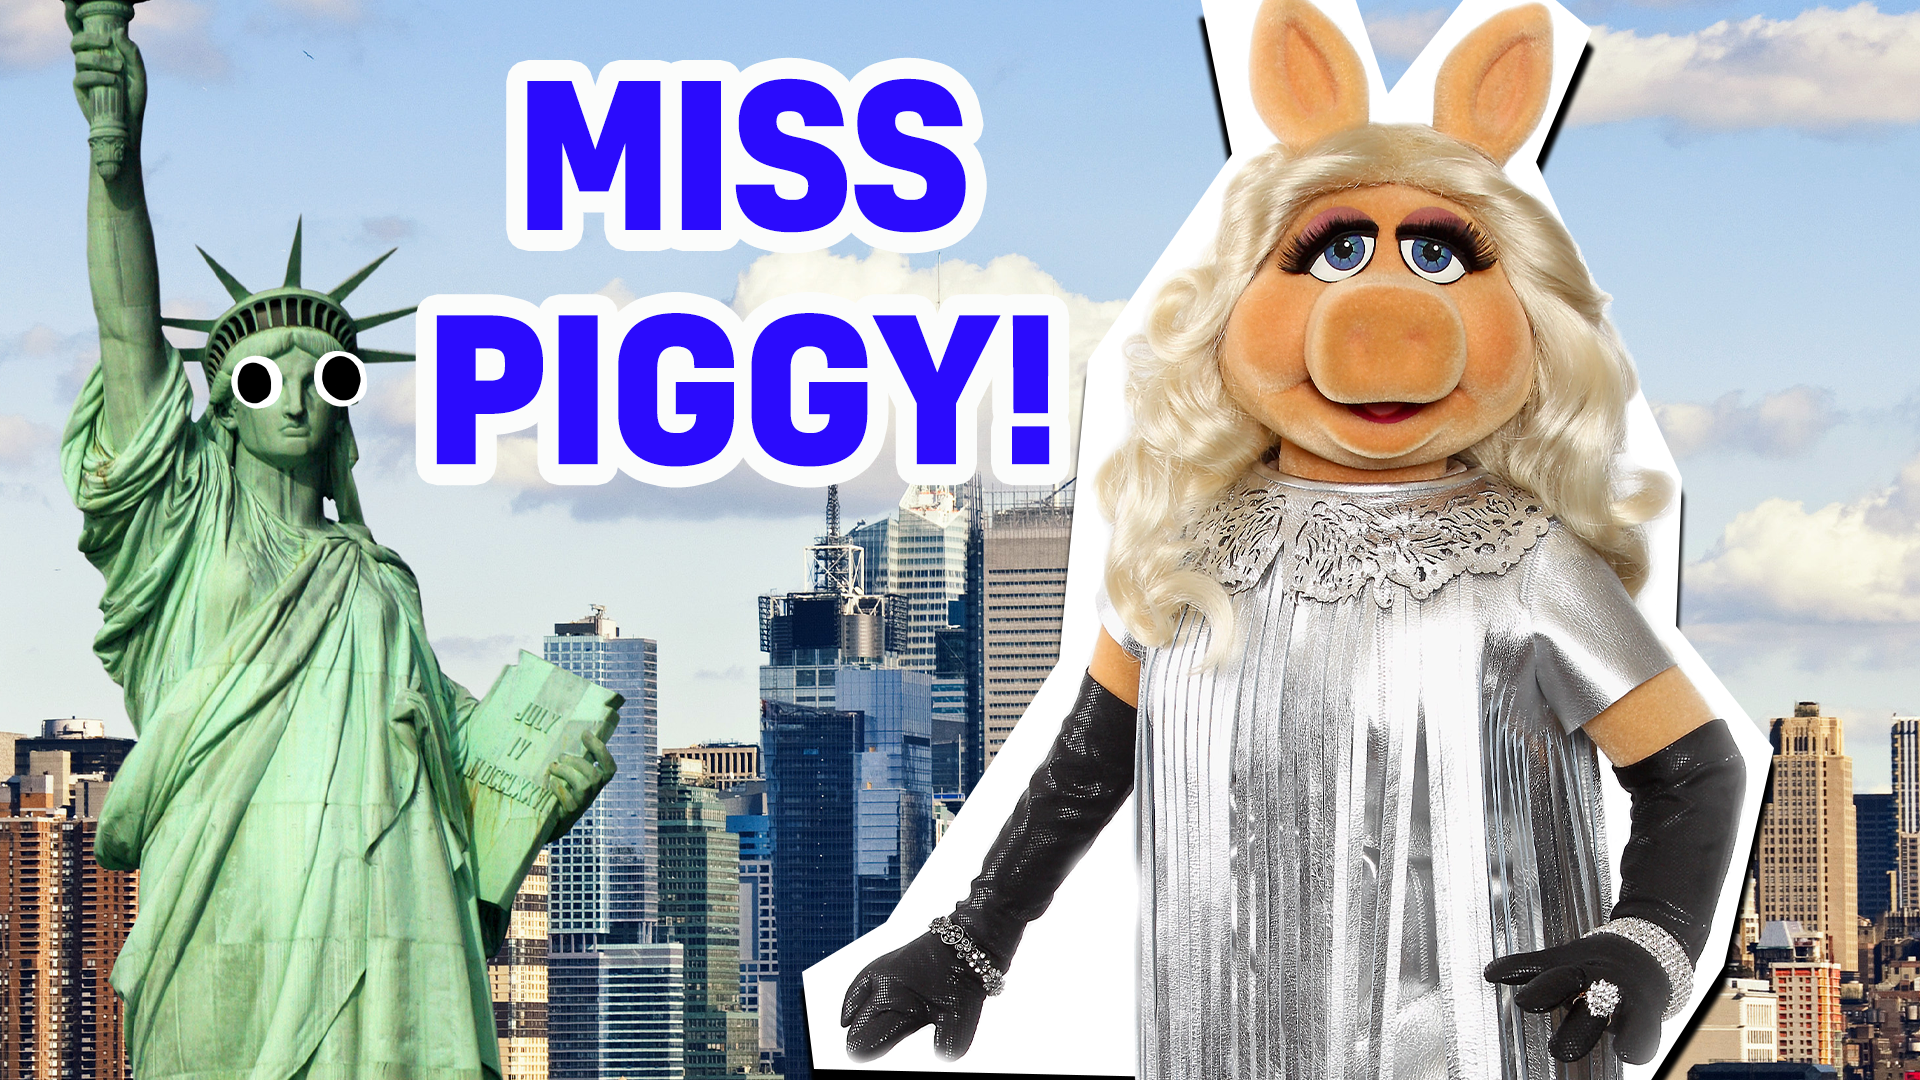 You're Miss Piggy! You're sassy, confident and you always go after what you want! Nothing's gonna stop you!